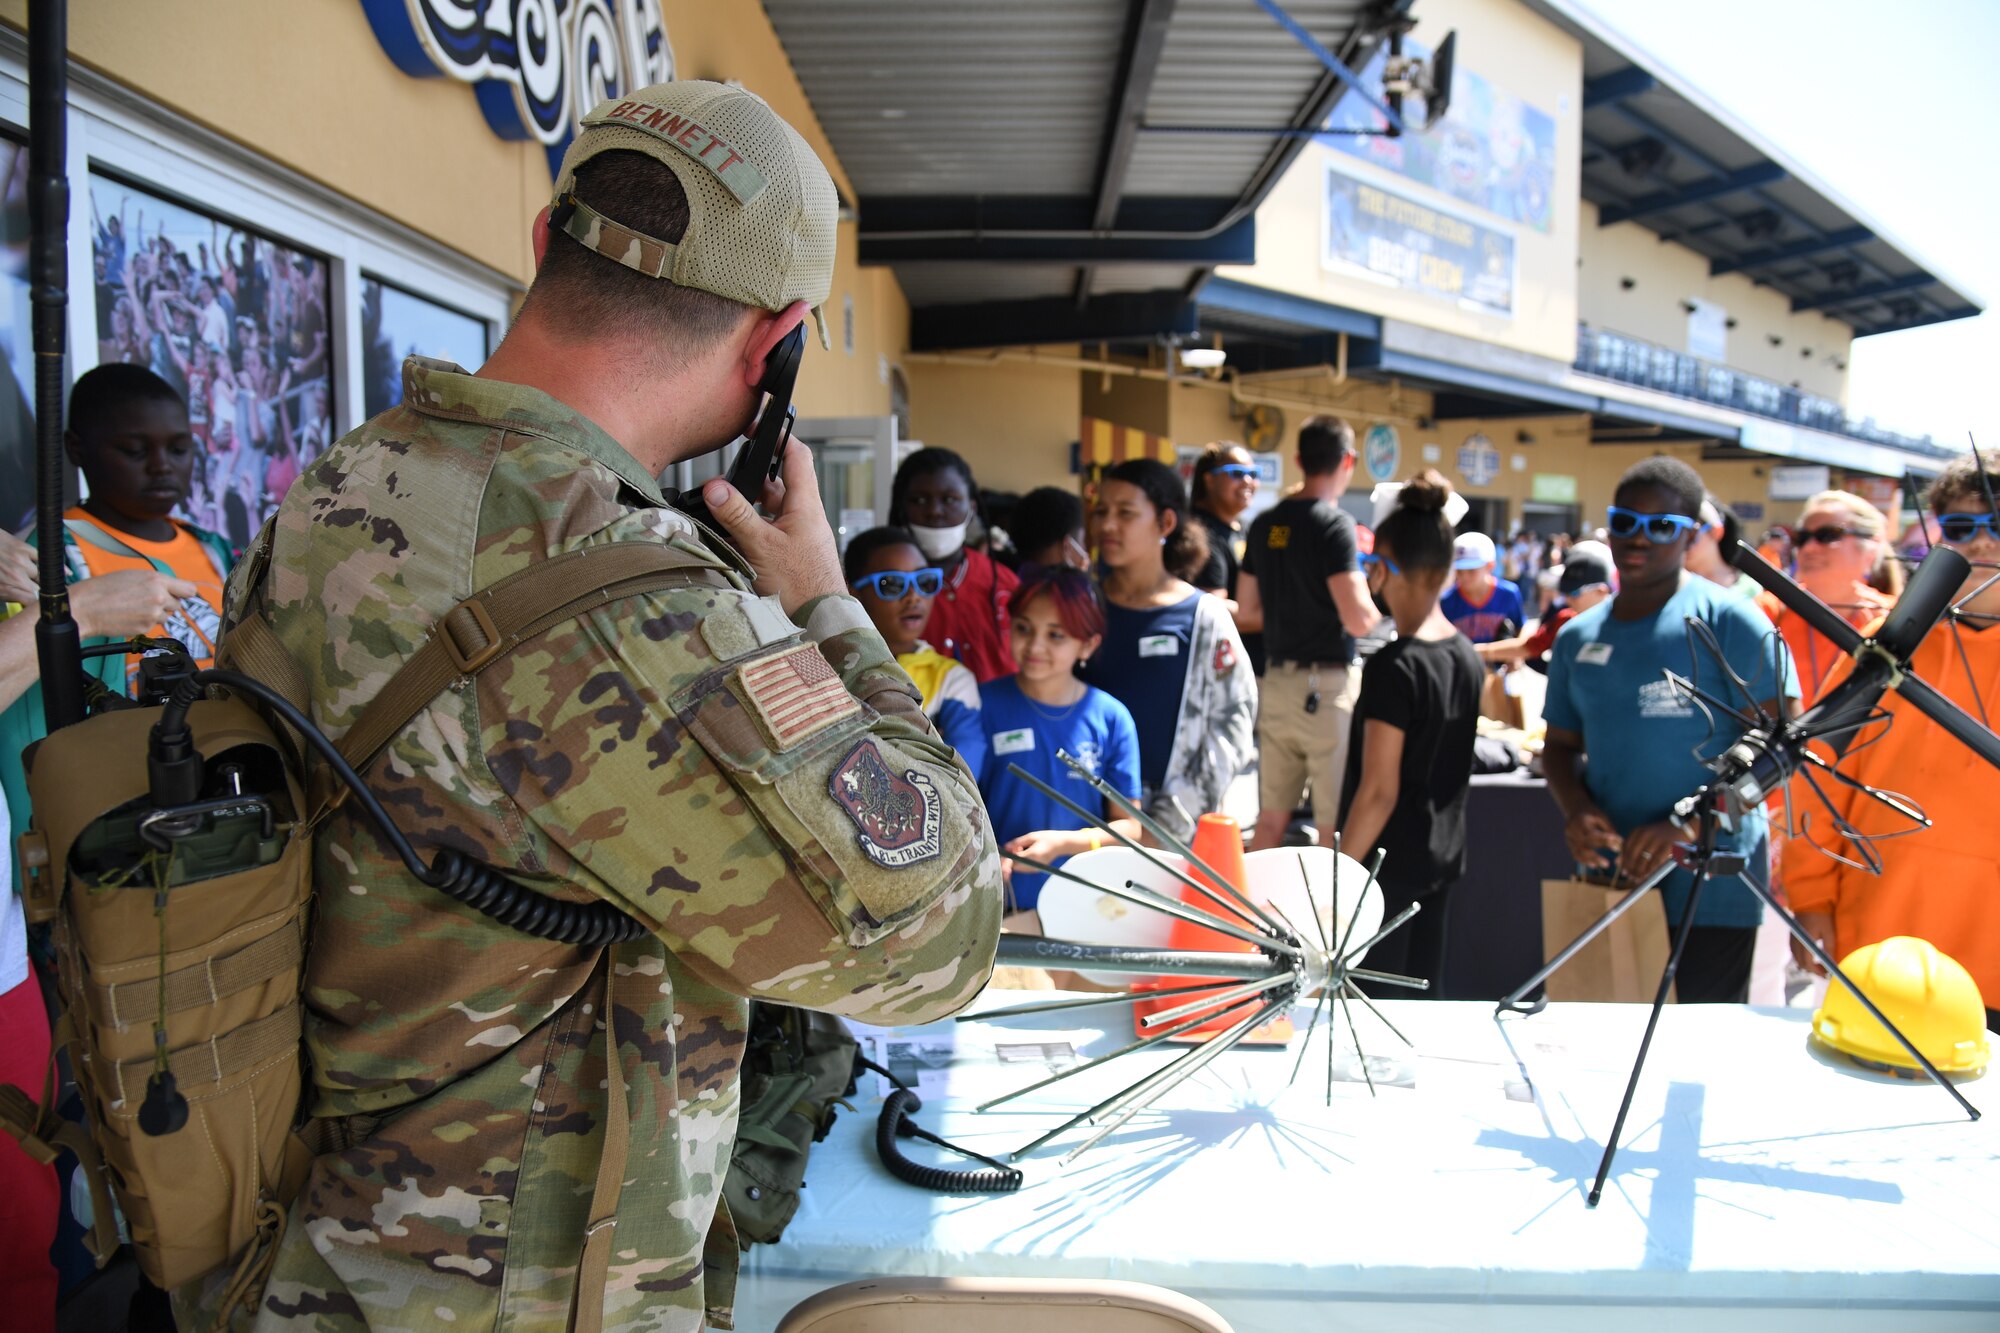 U.S. Air Force Staff Sgt. Blake Bennett, 338th Training Squadron instructor, provides a demonstration on radio frequency transmissions equipment to students and teachers from Gulfport's Central Elementary School during the Biloxi Shuckers Education Day event in Biloxi, Mississippi, May 11, 2022. The event allowed Airmen from the 81st Training Group to set up training equipment displays for local school-aged children to view during the Biloxi Shuckers' game. (U.S. Air Force photo by Kemberly Groue)